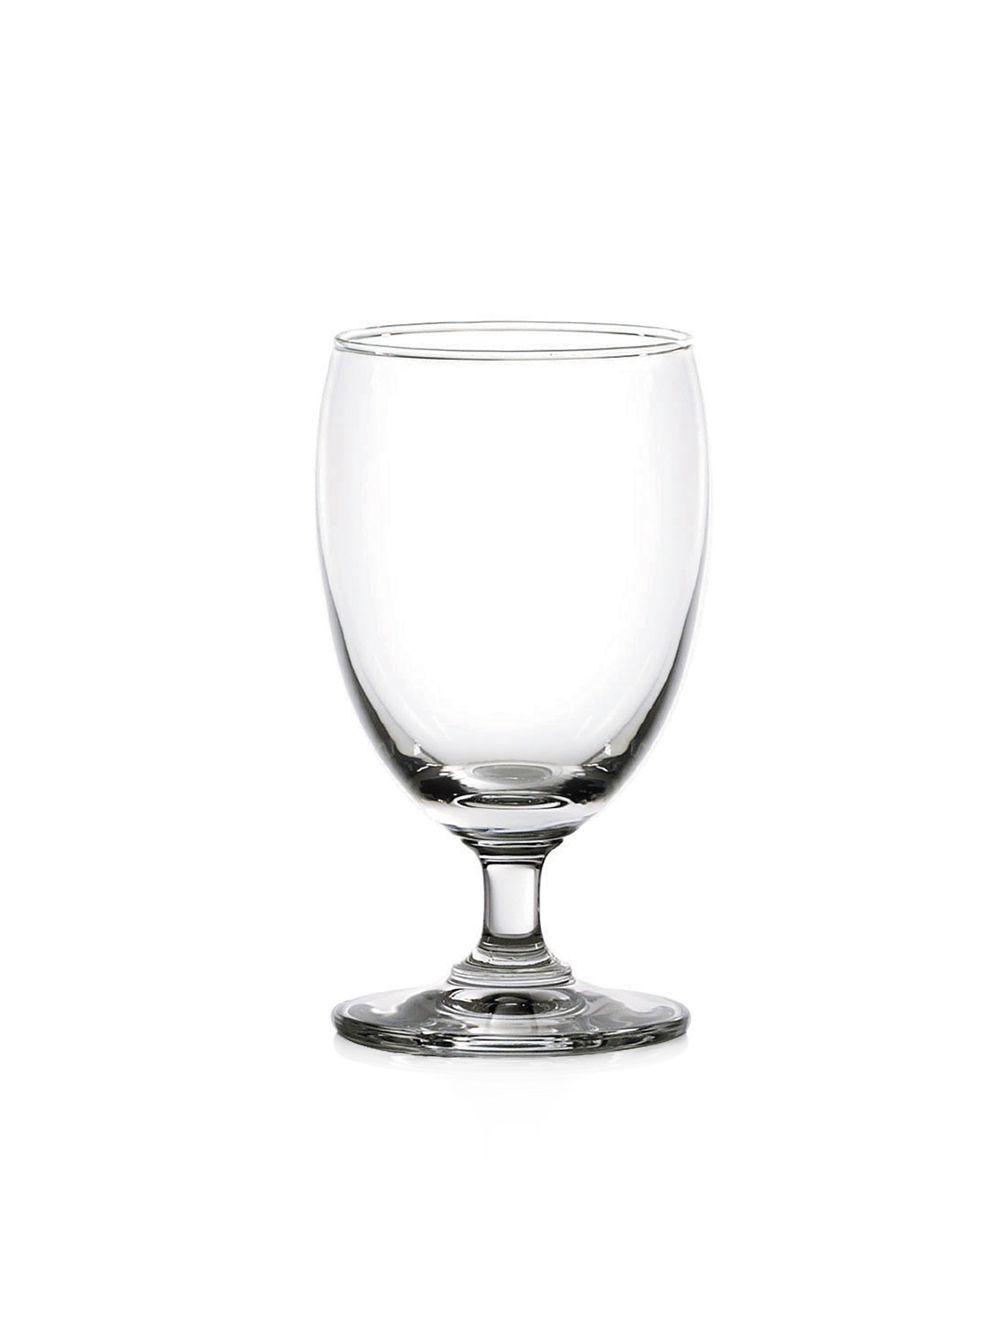 Ocean Classic Banquet Goblet Glass 308ml Pack Of 6